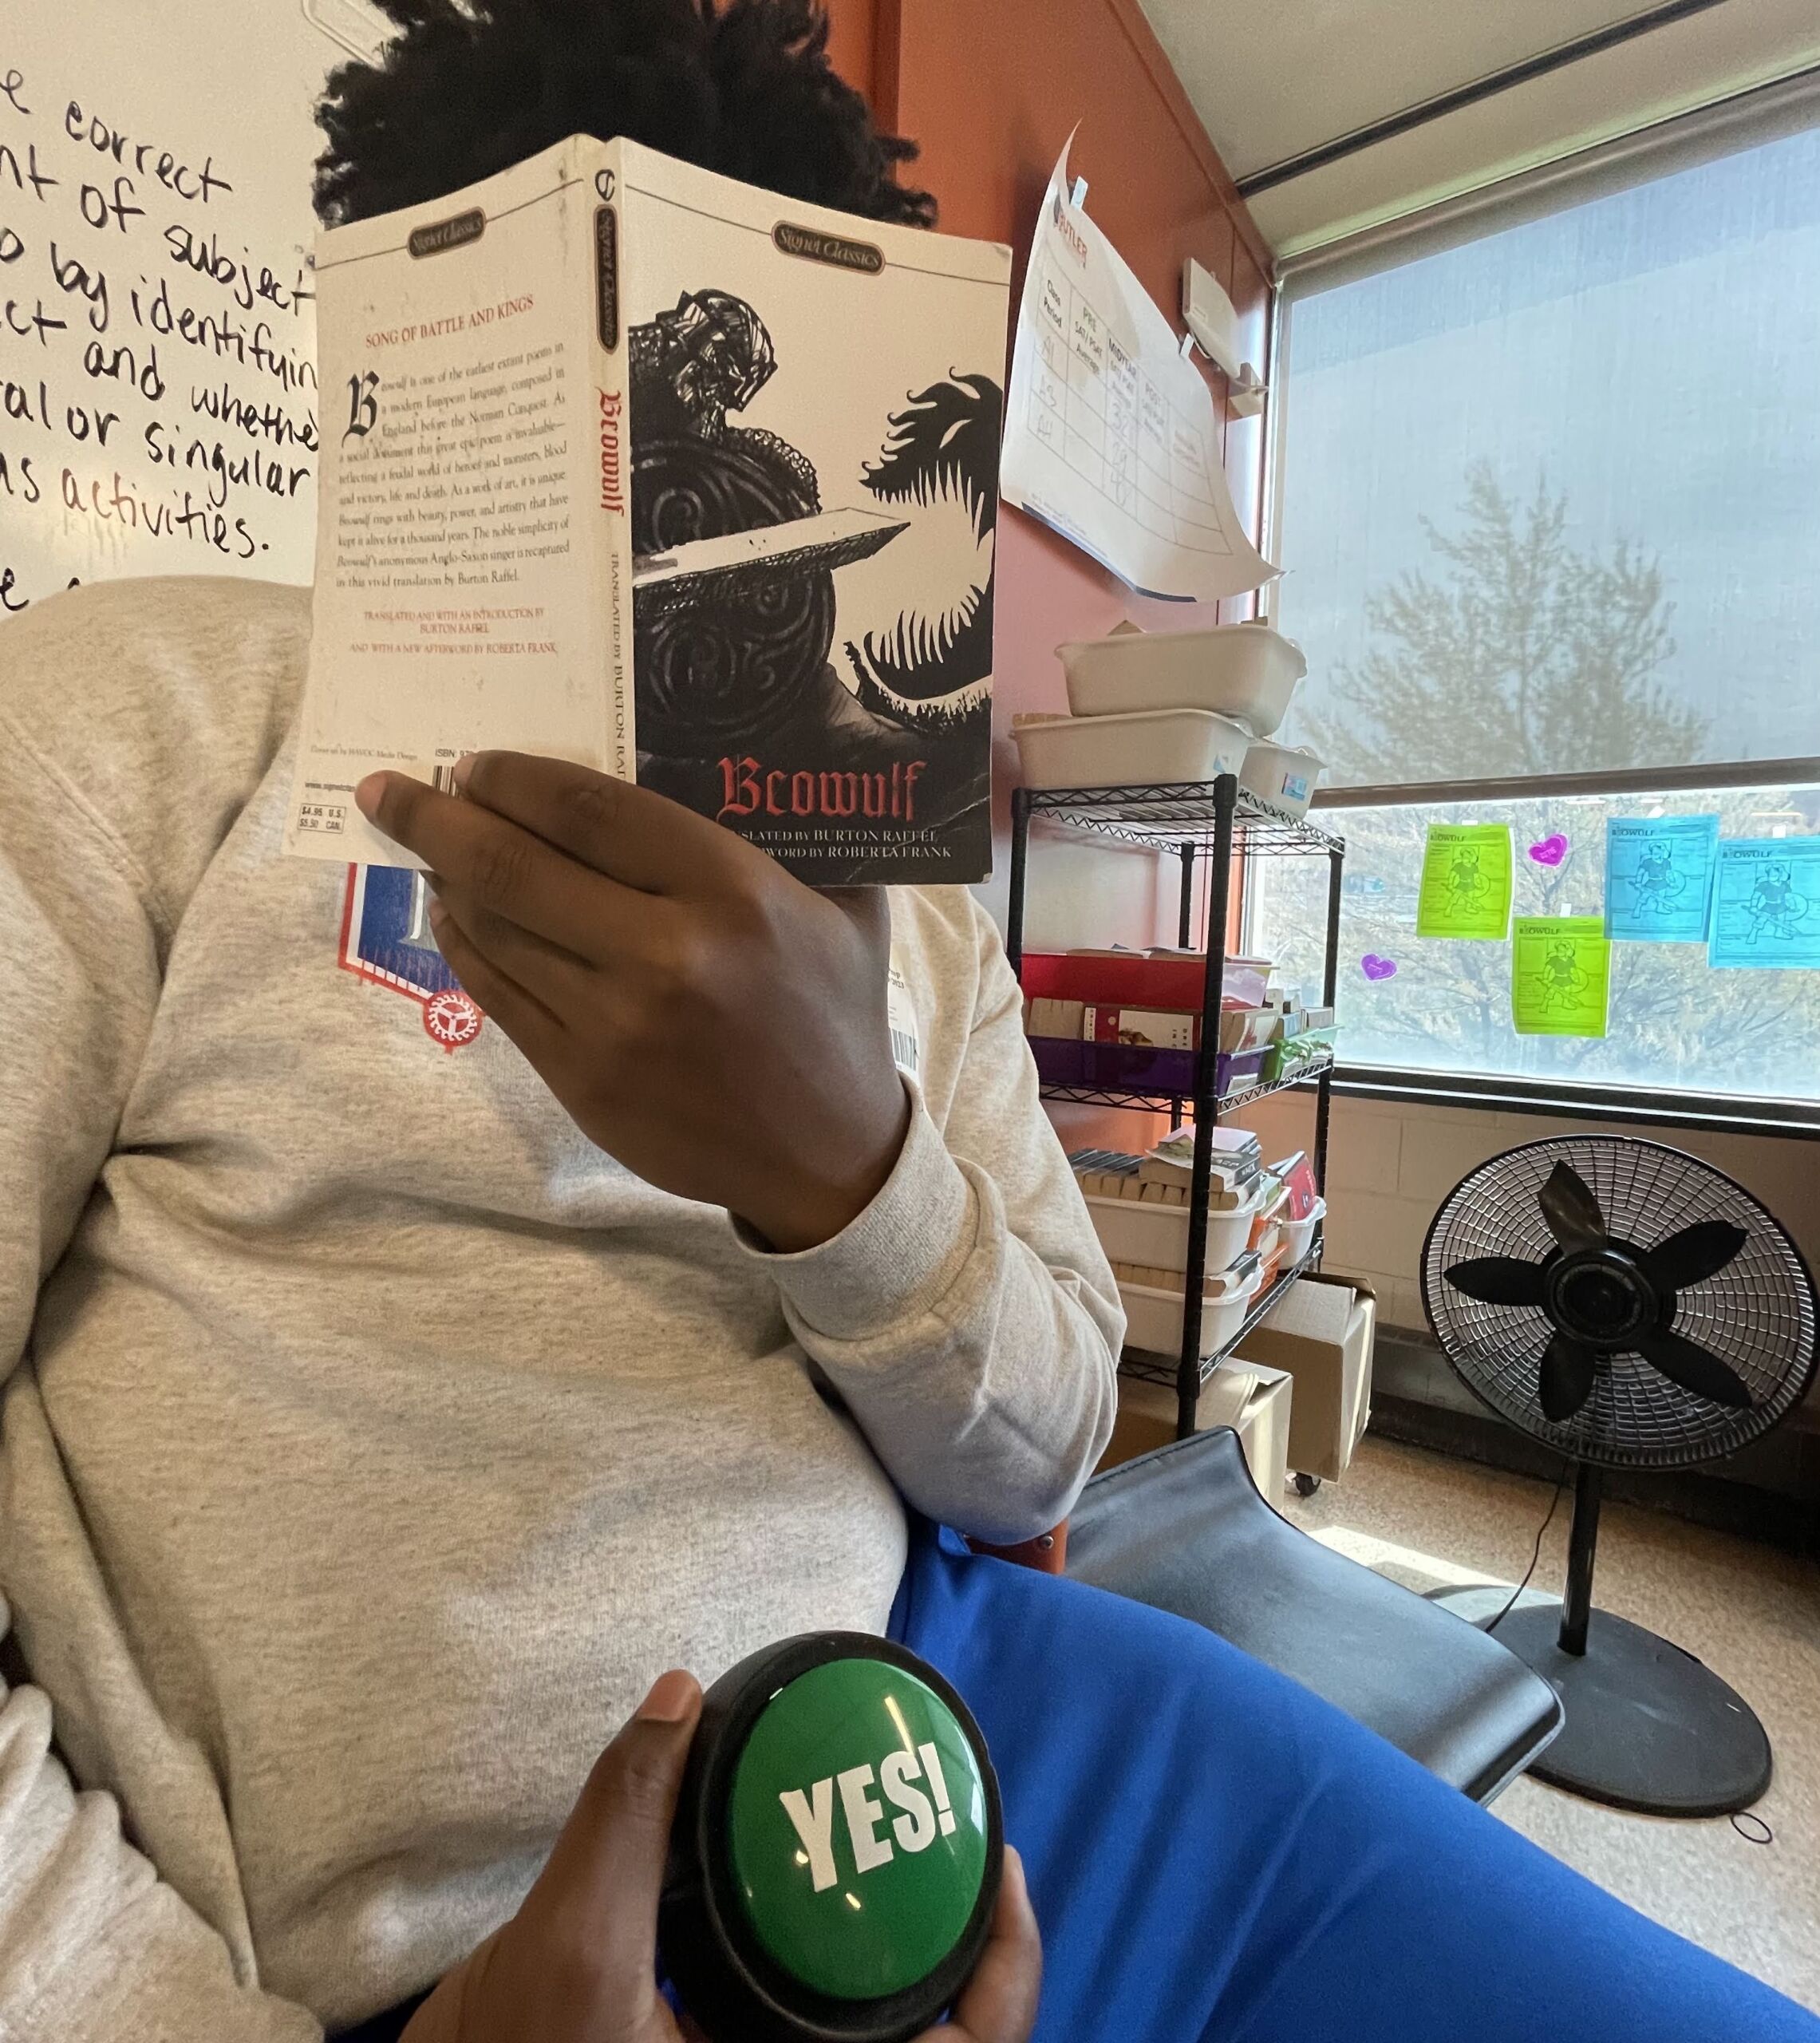 In this photo, you can see a Black student with a Butler College Prep sweatshirt on reading a book titled Beowulf. They are holding the book in front of their face with one hand and a green button in their other hand that says "Yes!". Behind them, you can a classroom space with a whiteboard, some shelves, and a window.